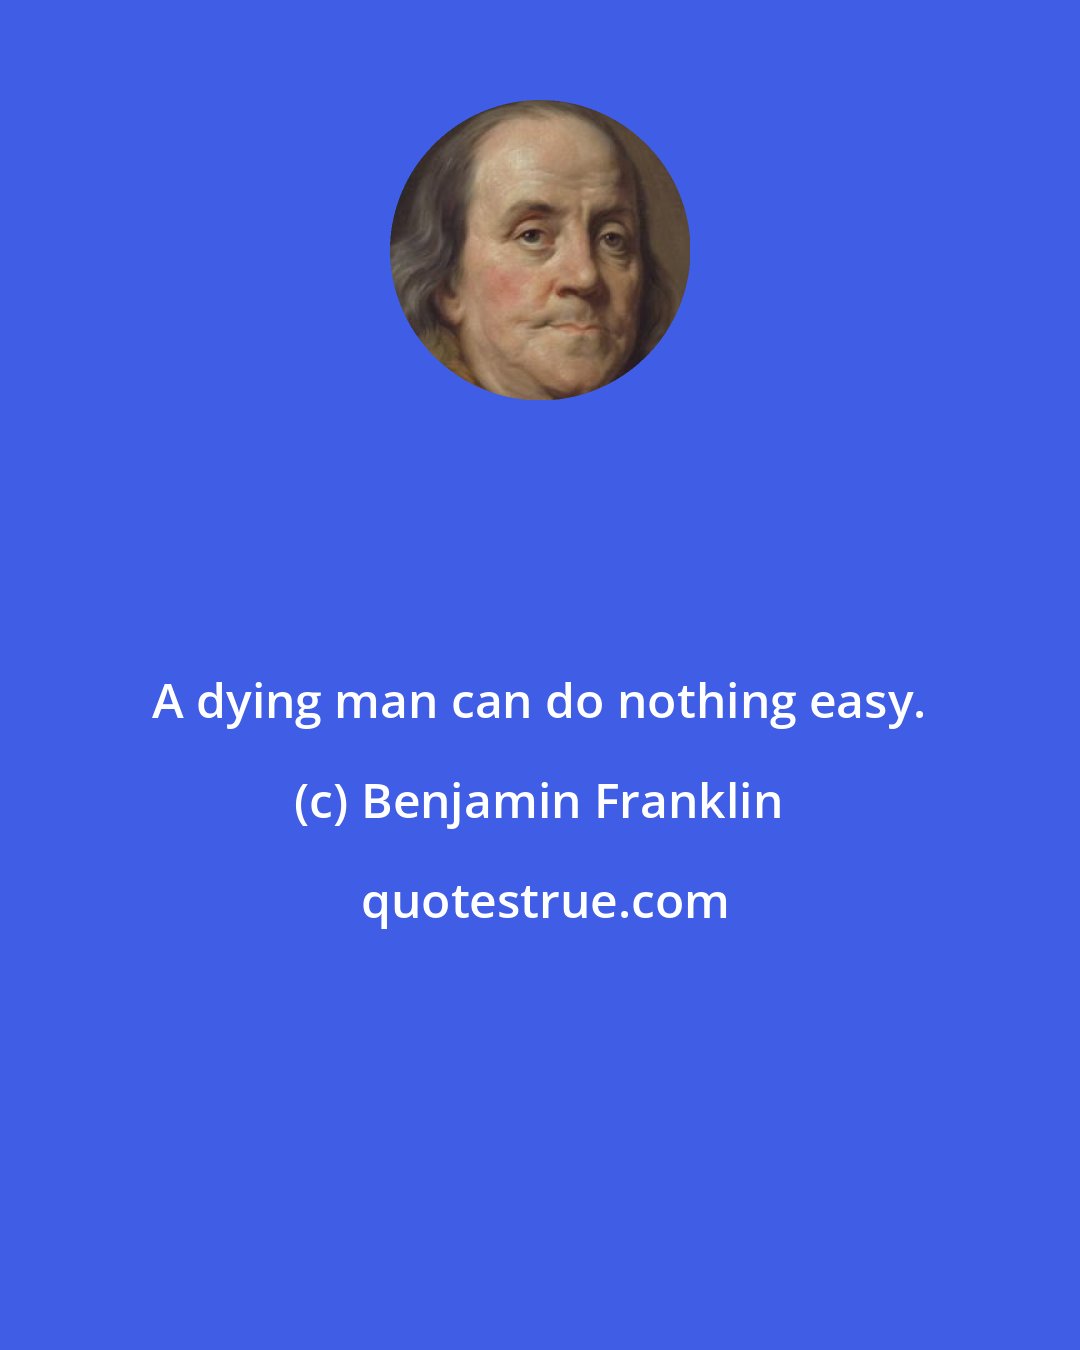 Benjamin Franklin: A dying man can do nothing easy.